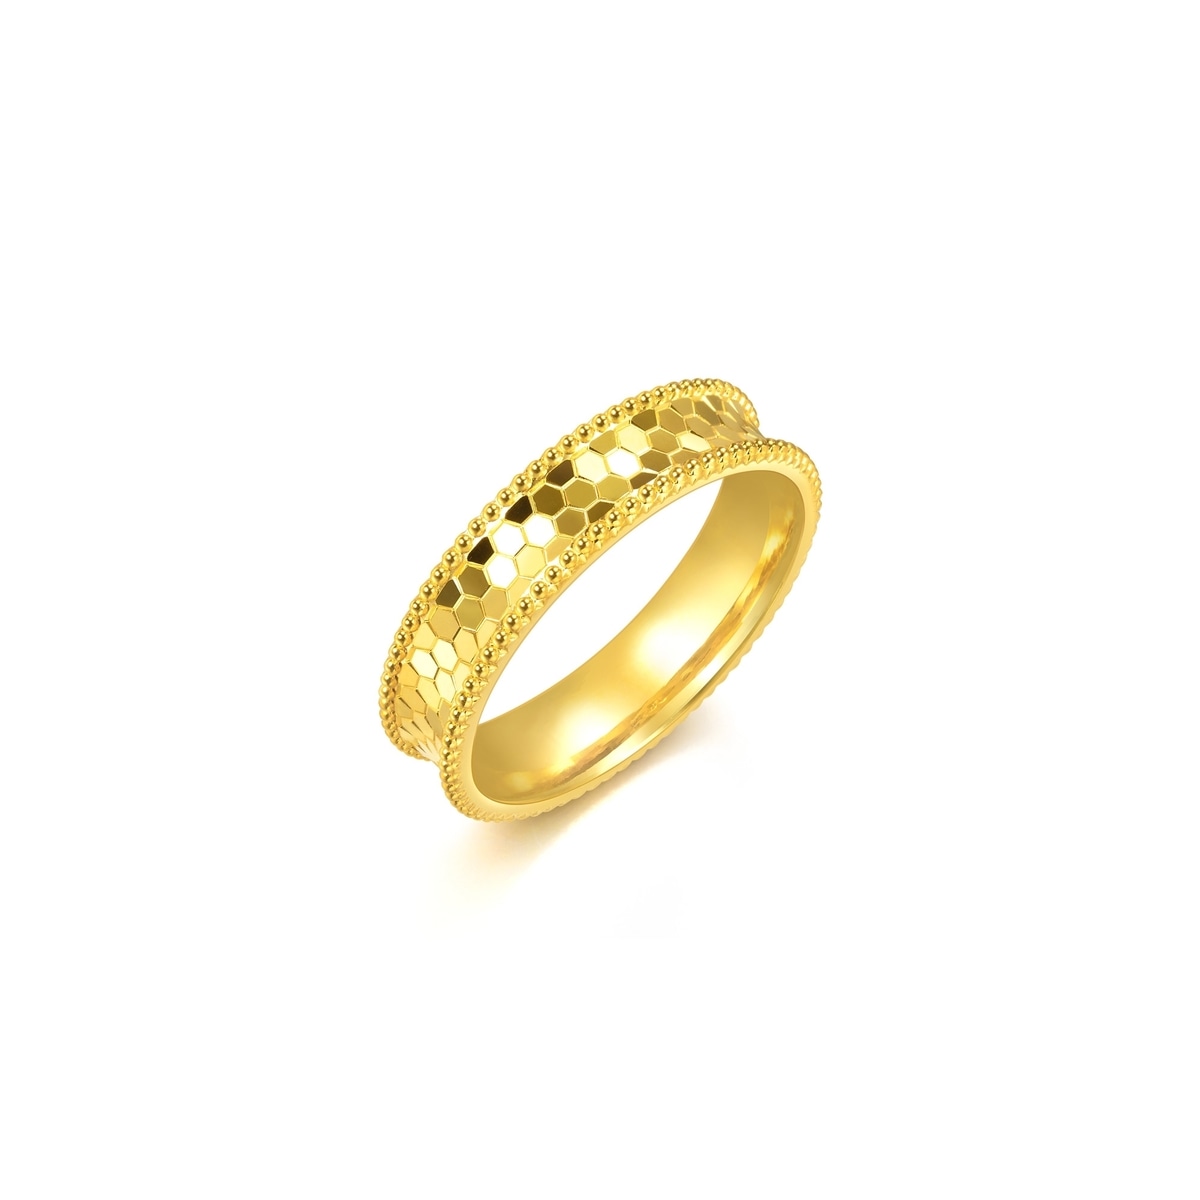 Mirror Gold 999 Gold Ring - 93547R | Chow Sang Sang Jewellery